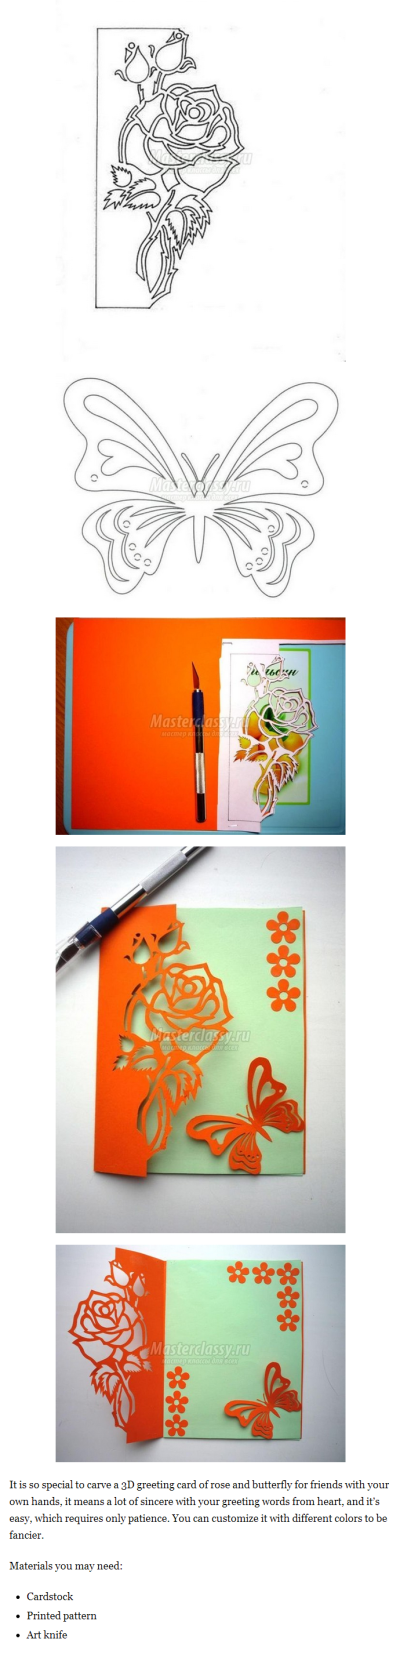 Free Carved Greeting Card Pattern – Rose and Butterfly1.纸2.印有花纹的纸 3.美工刀